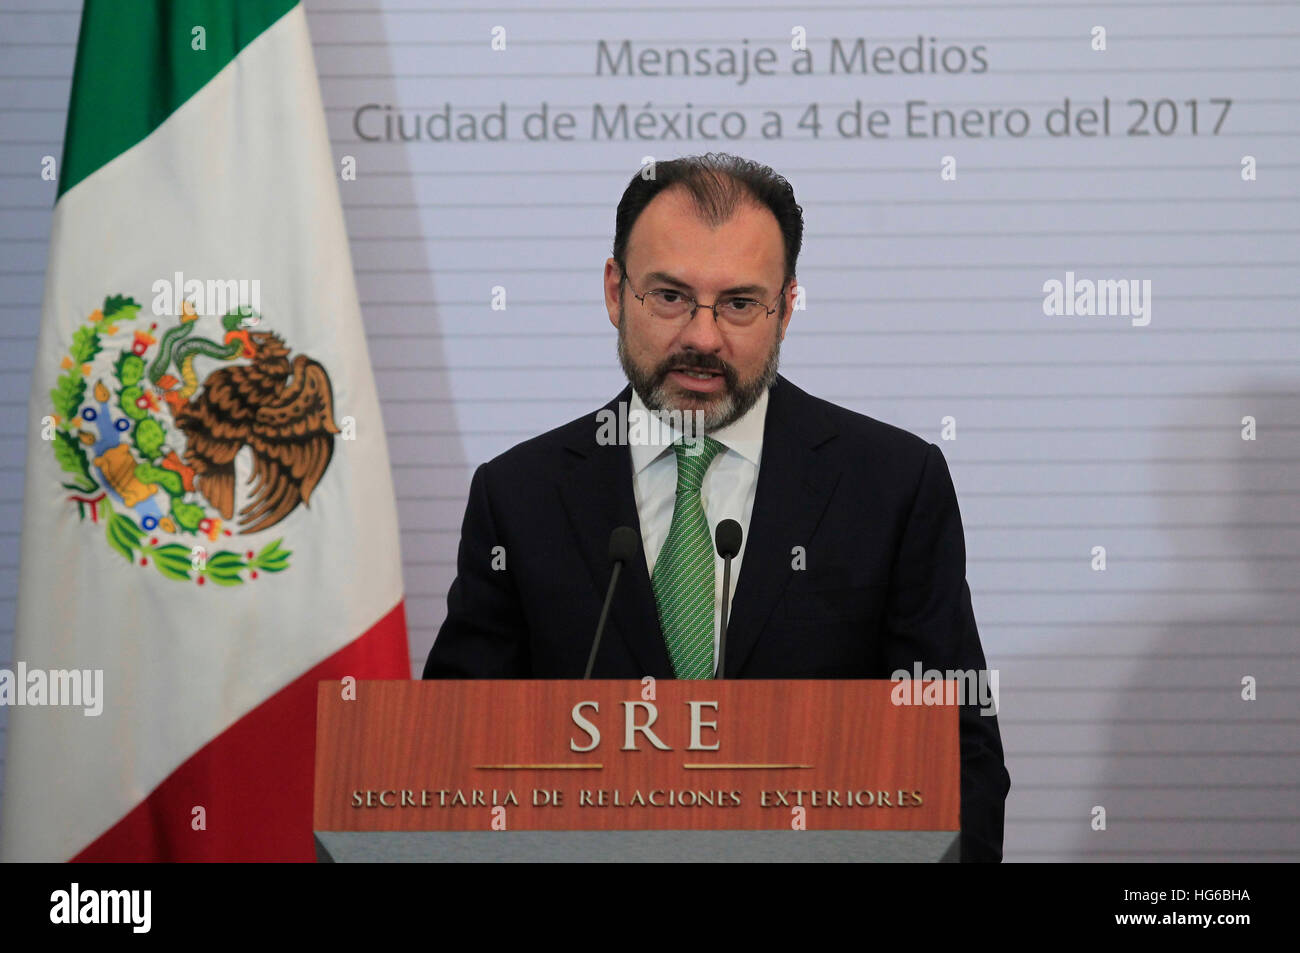 Mexico City, Mexico. 4th Jan, 2017. Mexico's new Foreign Minister Luis Videgaray delivers a speech during a press conference in Mexico City, capital of Mexico, on Jan. 4, 2017. Mexican President Enrique Pena Nieto on Wednesday named former Economy Minister Luis Videgaray Caso as his new foreign minister, replacing Claudia Ruiz Massieu. © Str/Xinhua/Alamy Live News Stock Photo